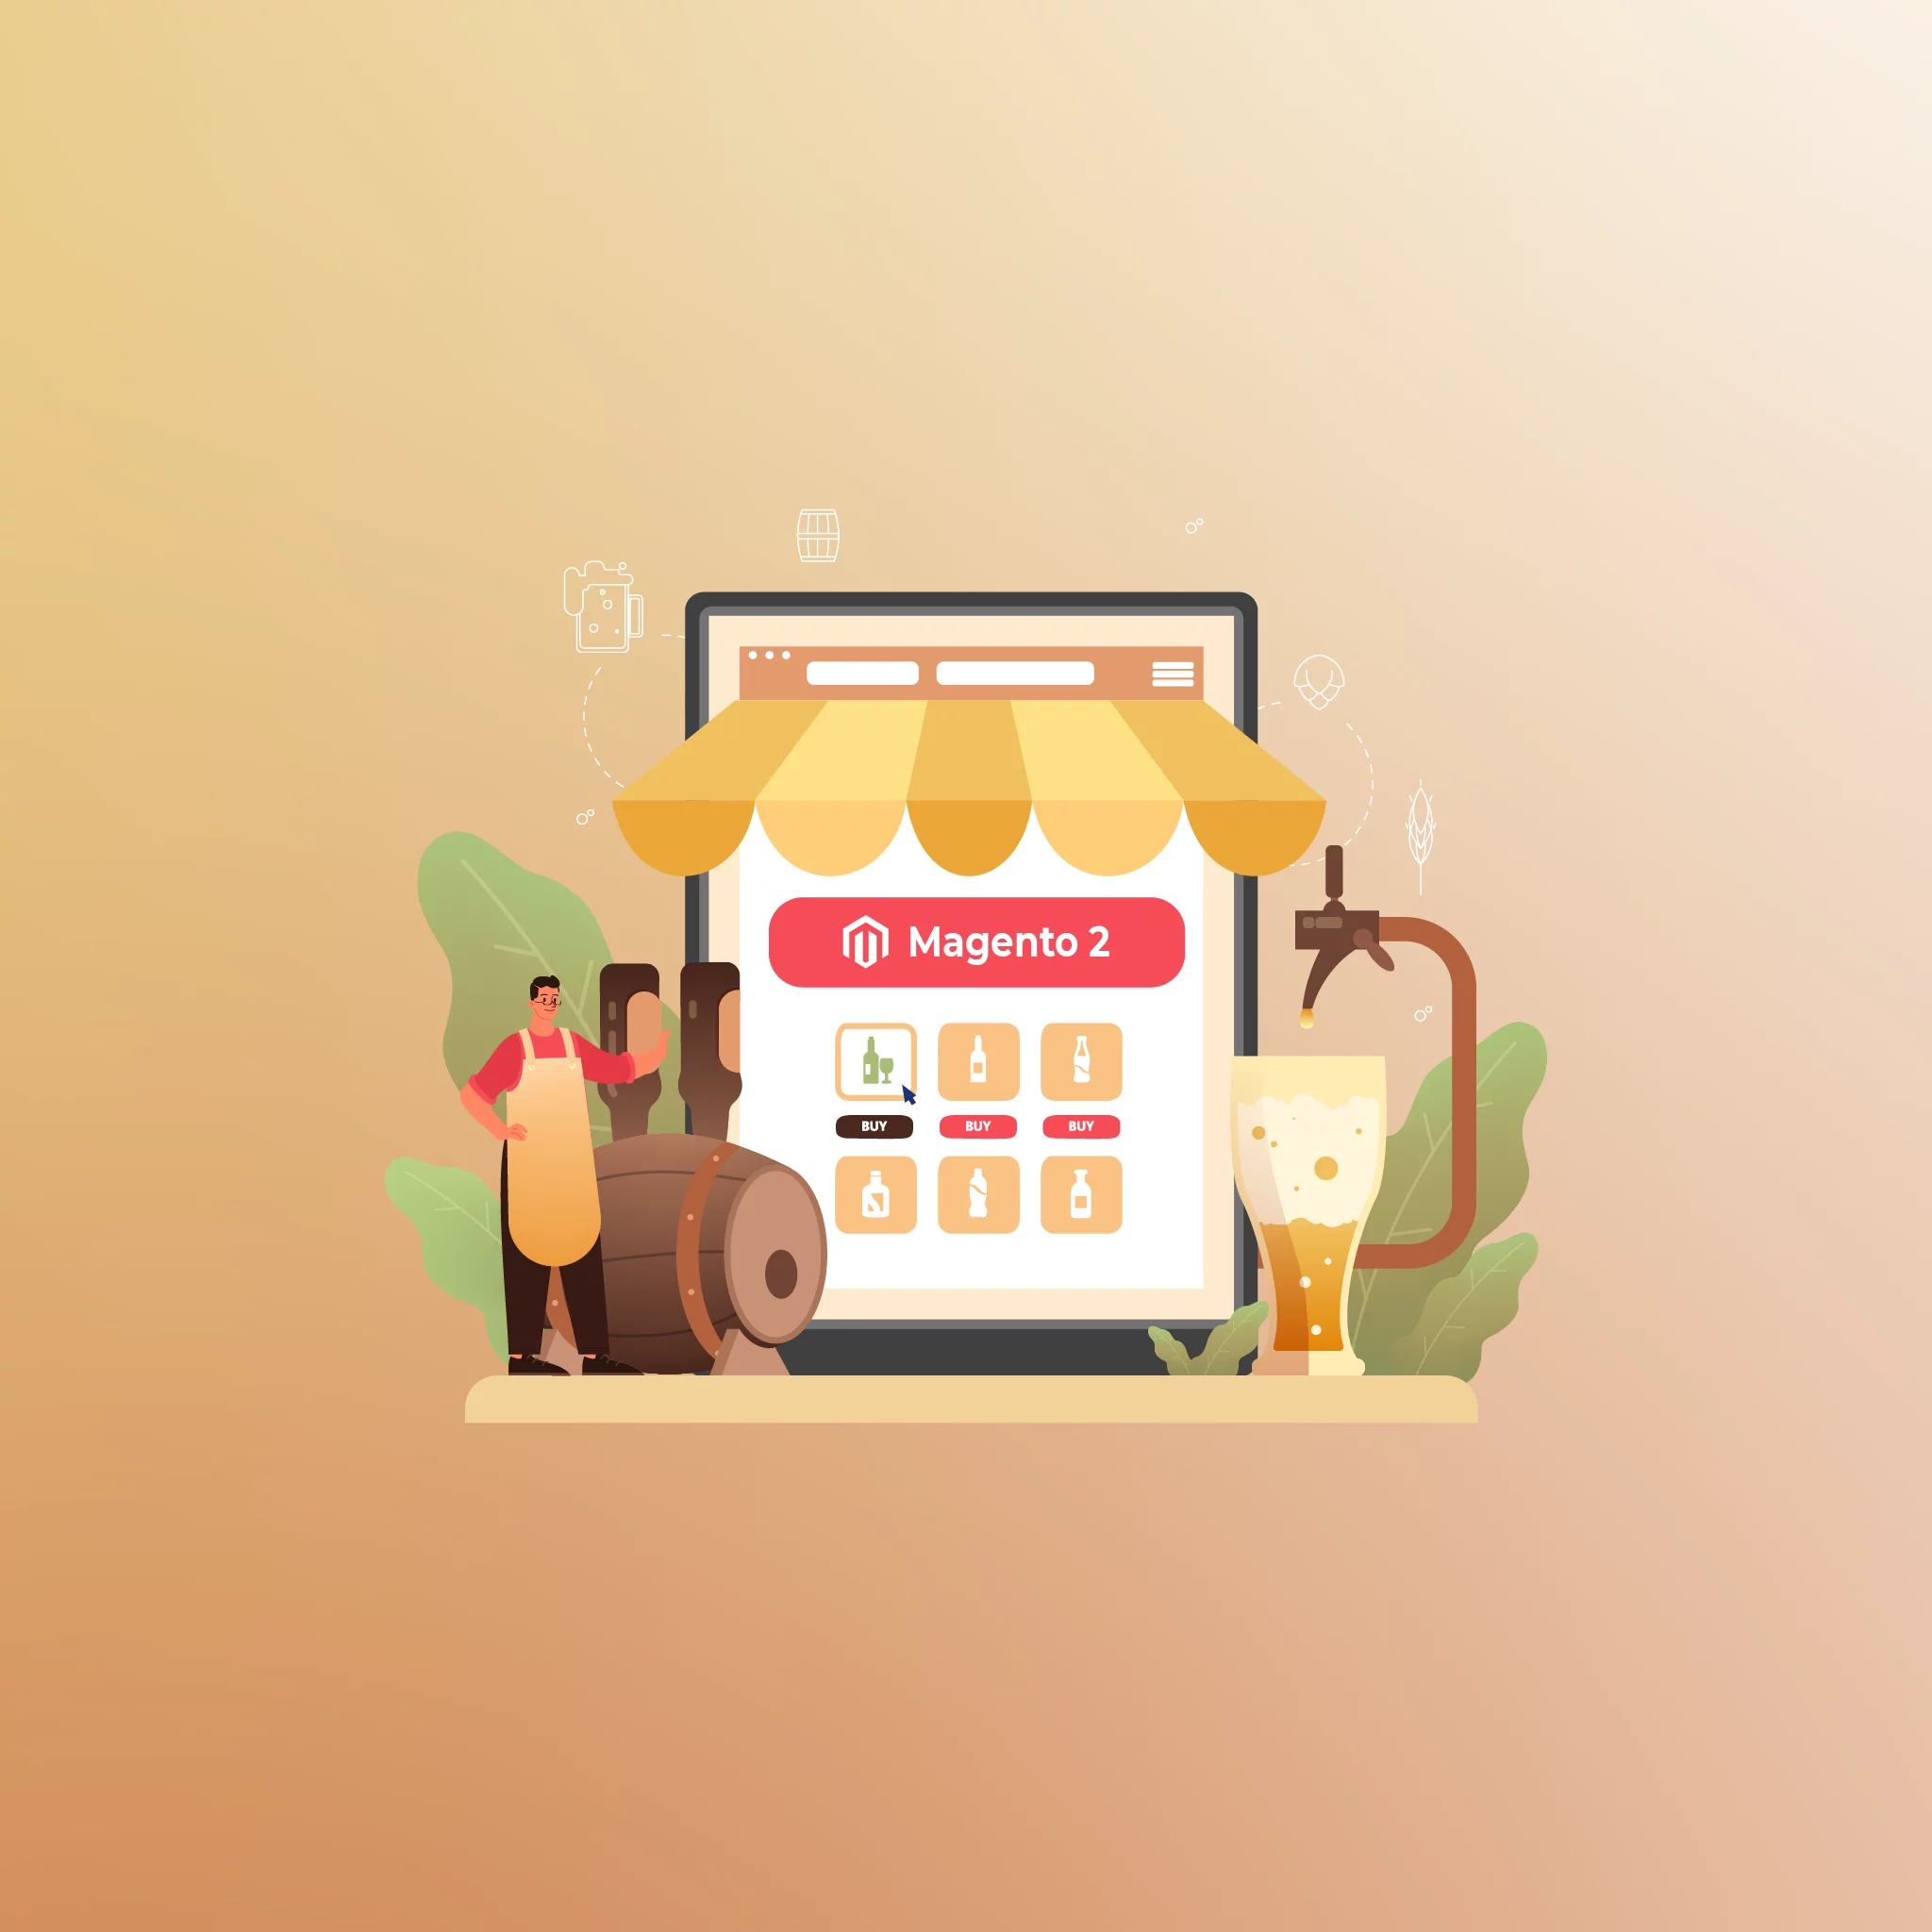 Beverage store owner selling products online using Magento 2 e-commerce platform. Learn how to launch your own beverage store on Magento with this step-by-step guide.